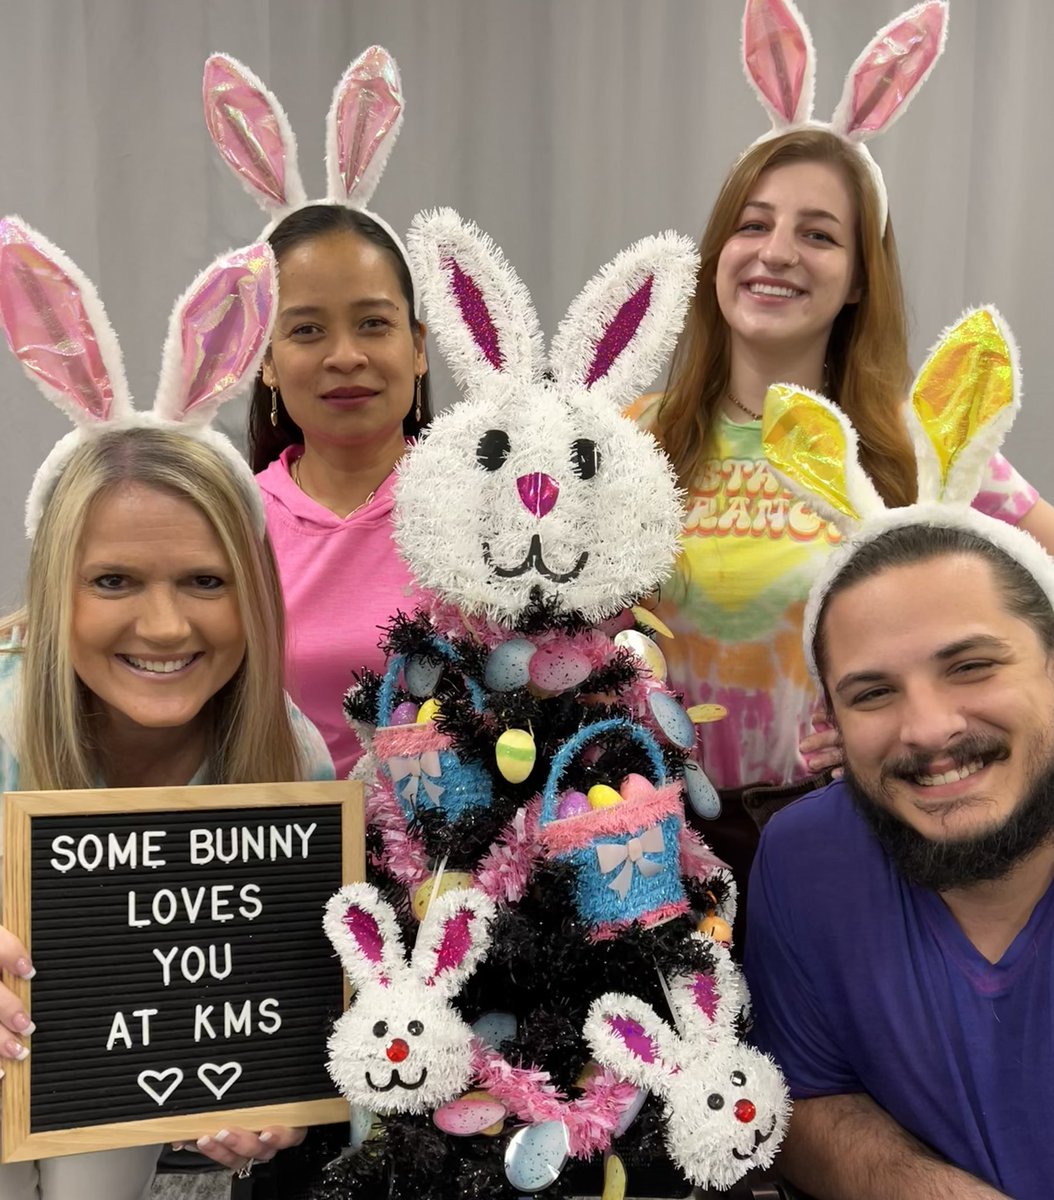 Listen Up, We’re ALL EARS!🐰 It’s a little EGGStra we know!😁 InClassSupport #QuadSquad wishing everyone @HumbleISD_KMS  & @HumbleISD a HOPPY EASTER Weekend!🐣🐰#KMSCougarPride #HappyEaster #SomeBunnyLovesYou @ClifPJ @MonalisaPace